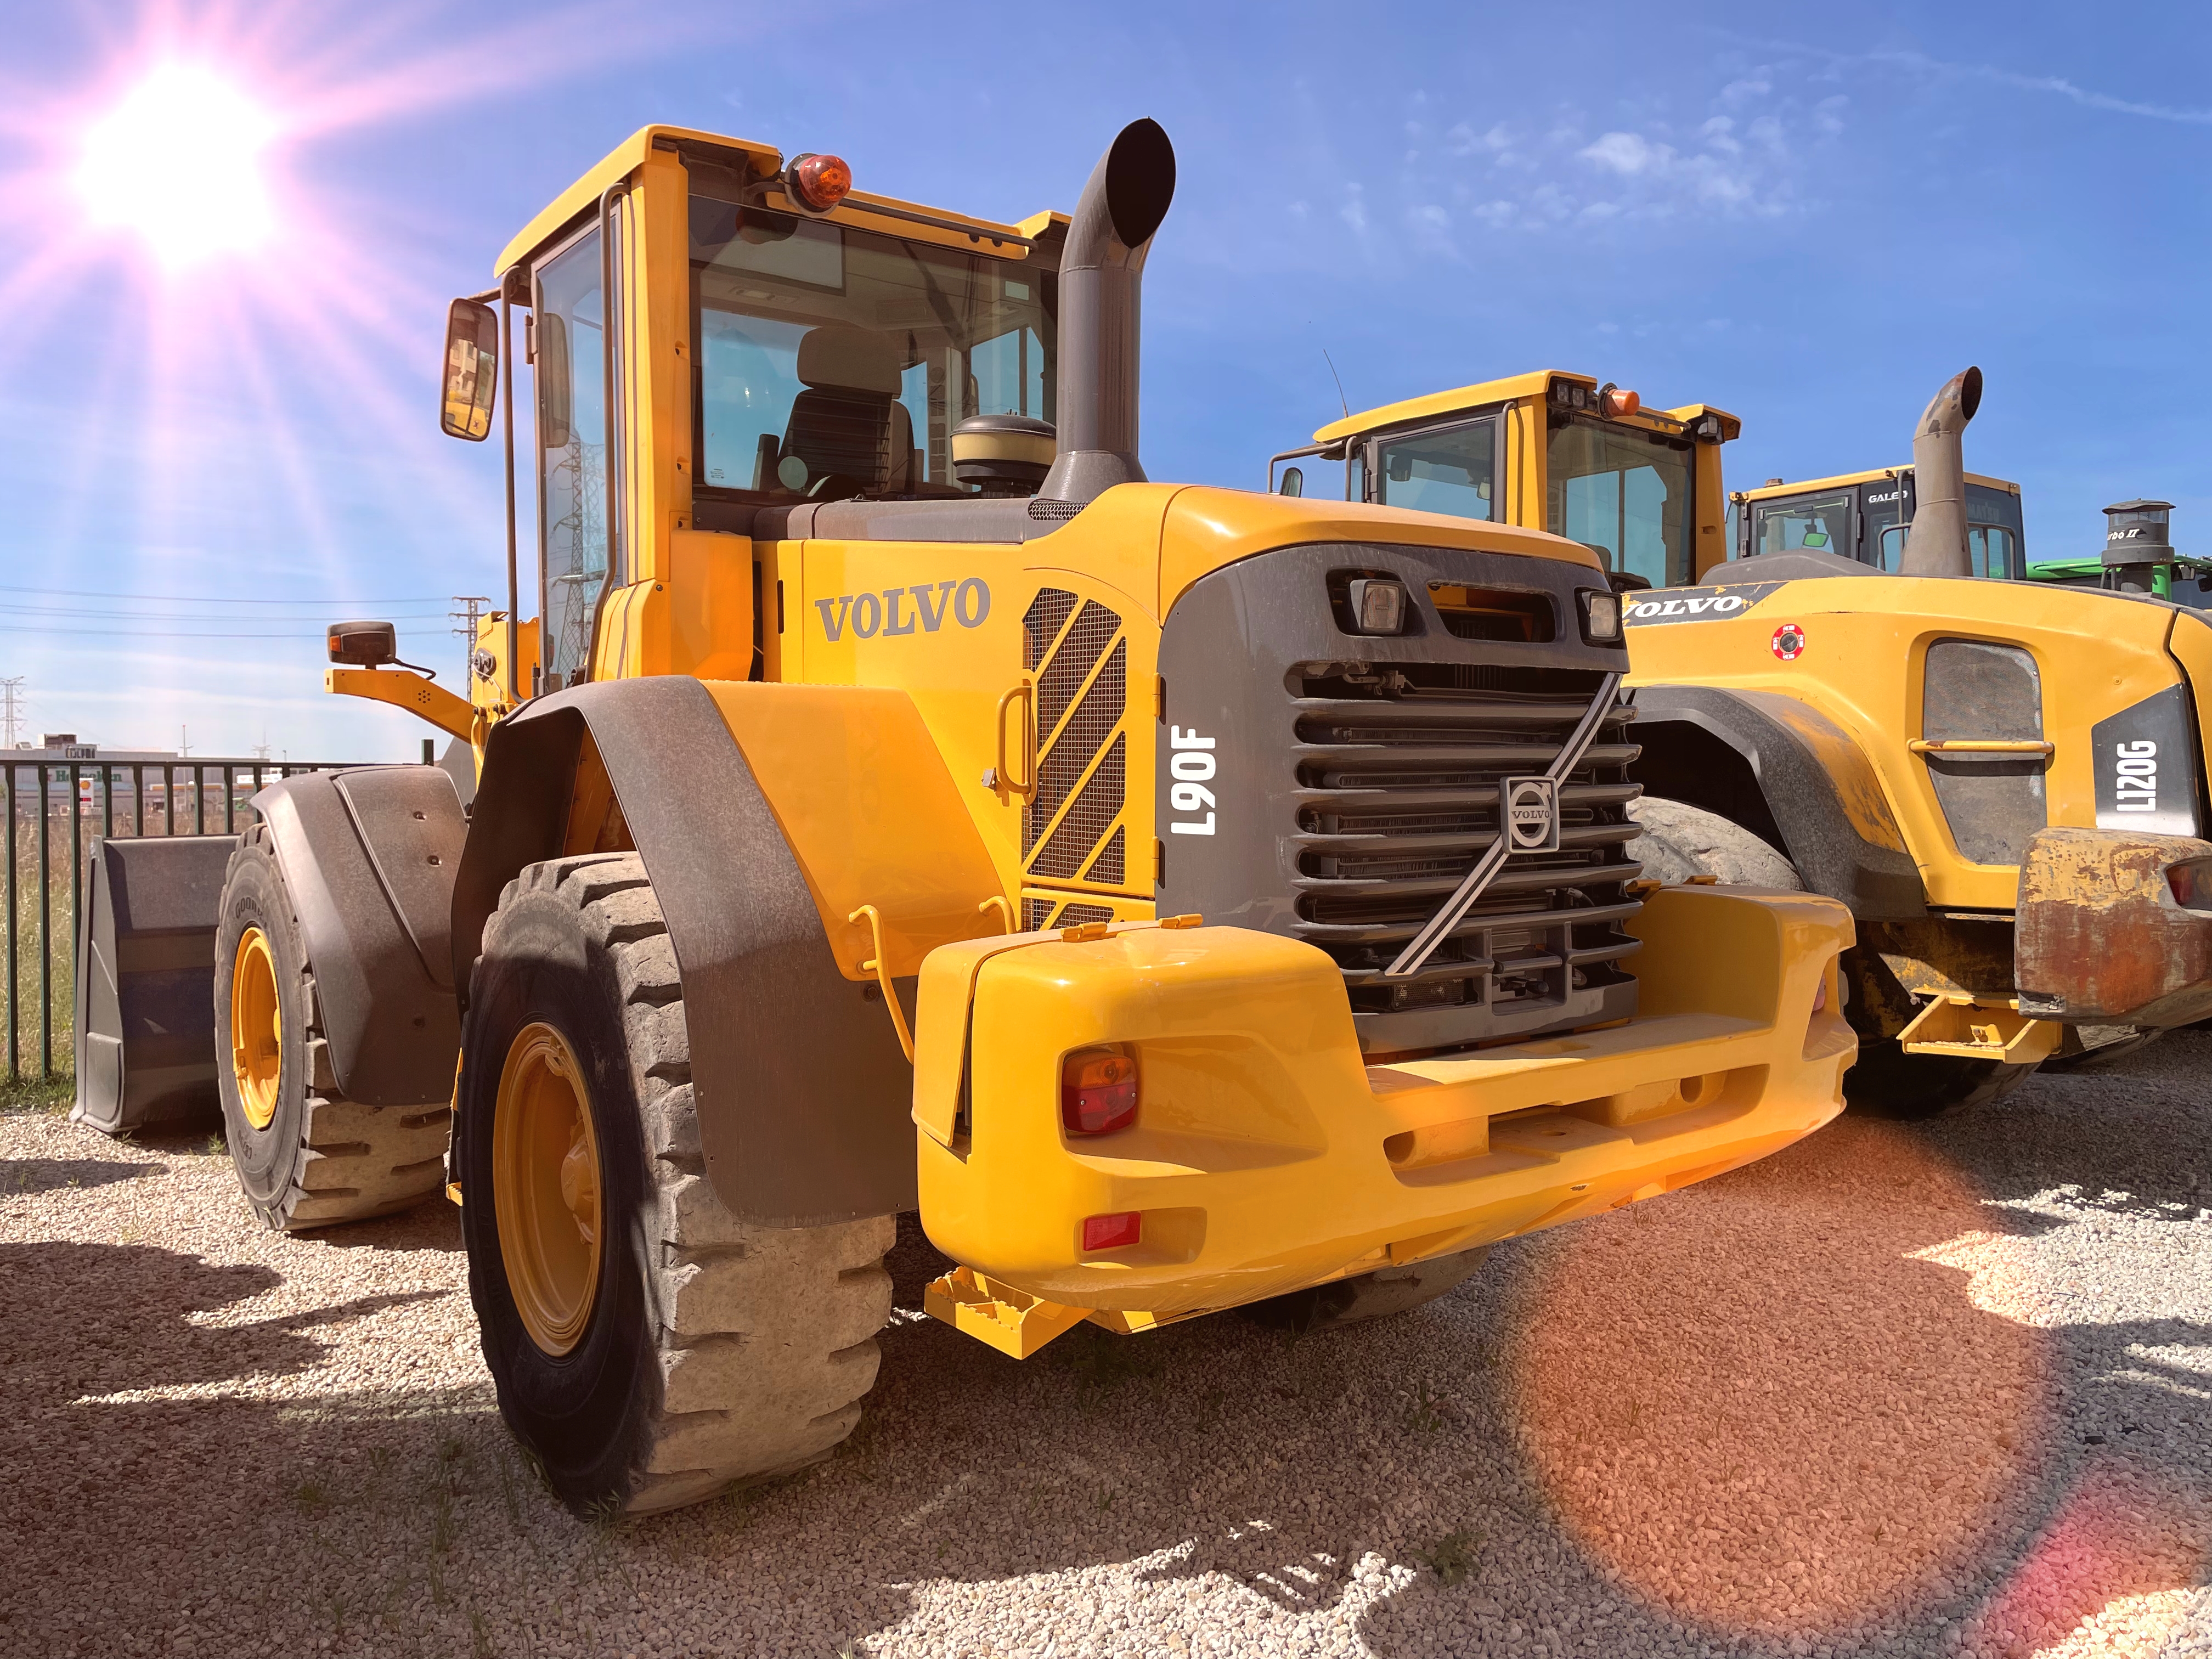 Ready for summer! And your machine… Is it truly prepared for the heat?